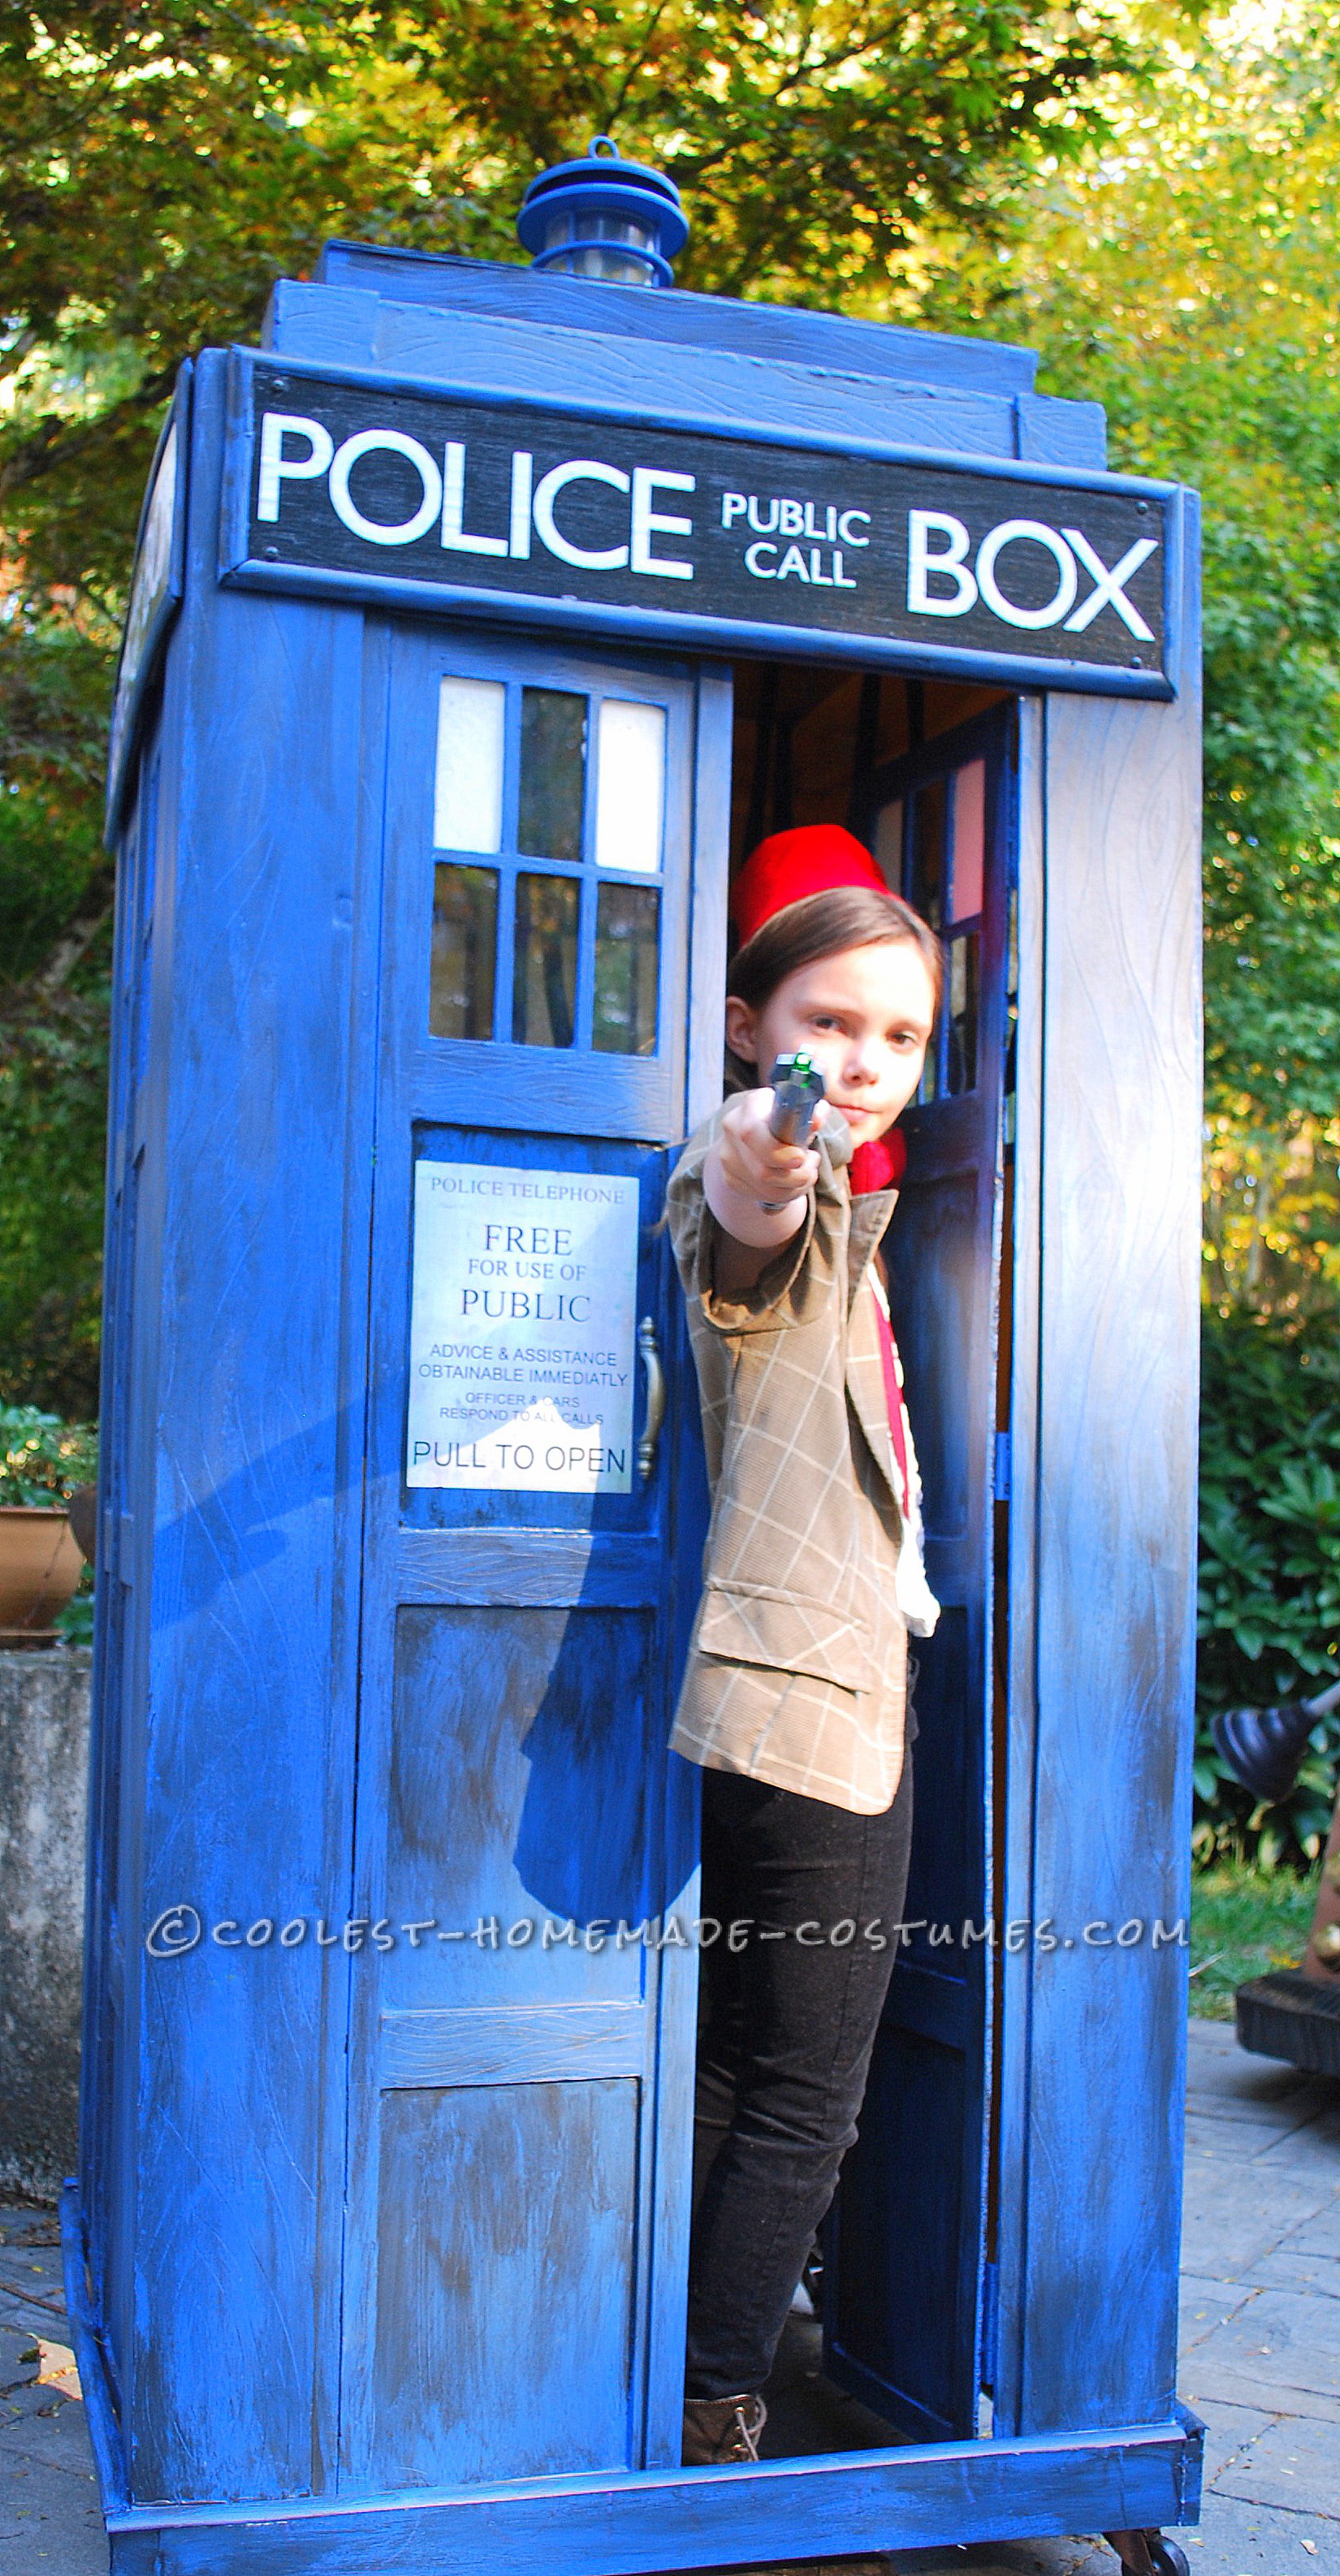 Coolest Homemade Doctor Who and TARDIS Costume